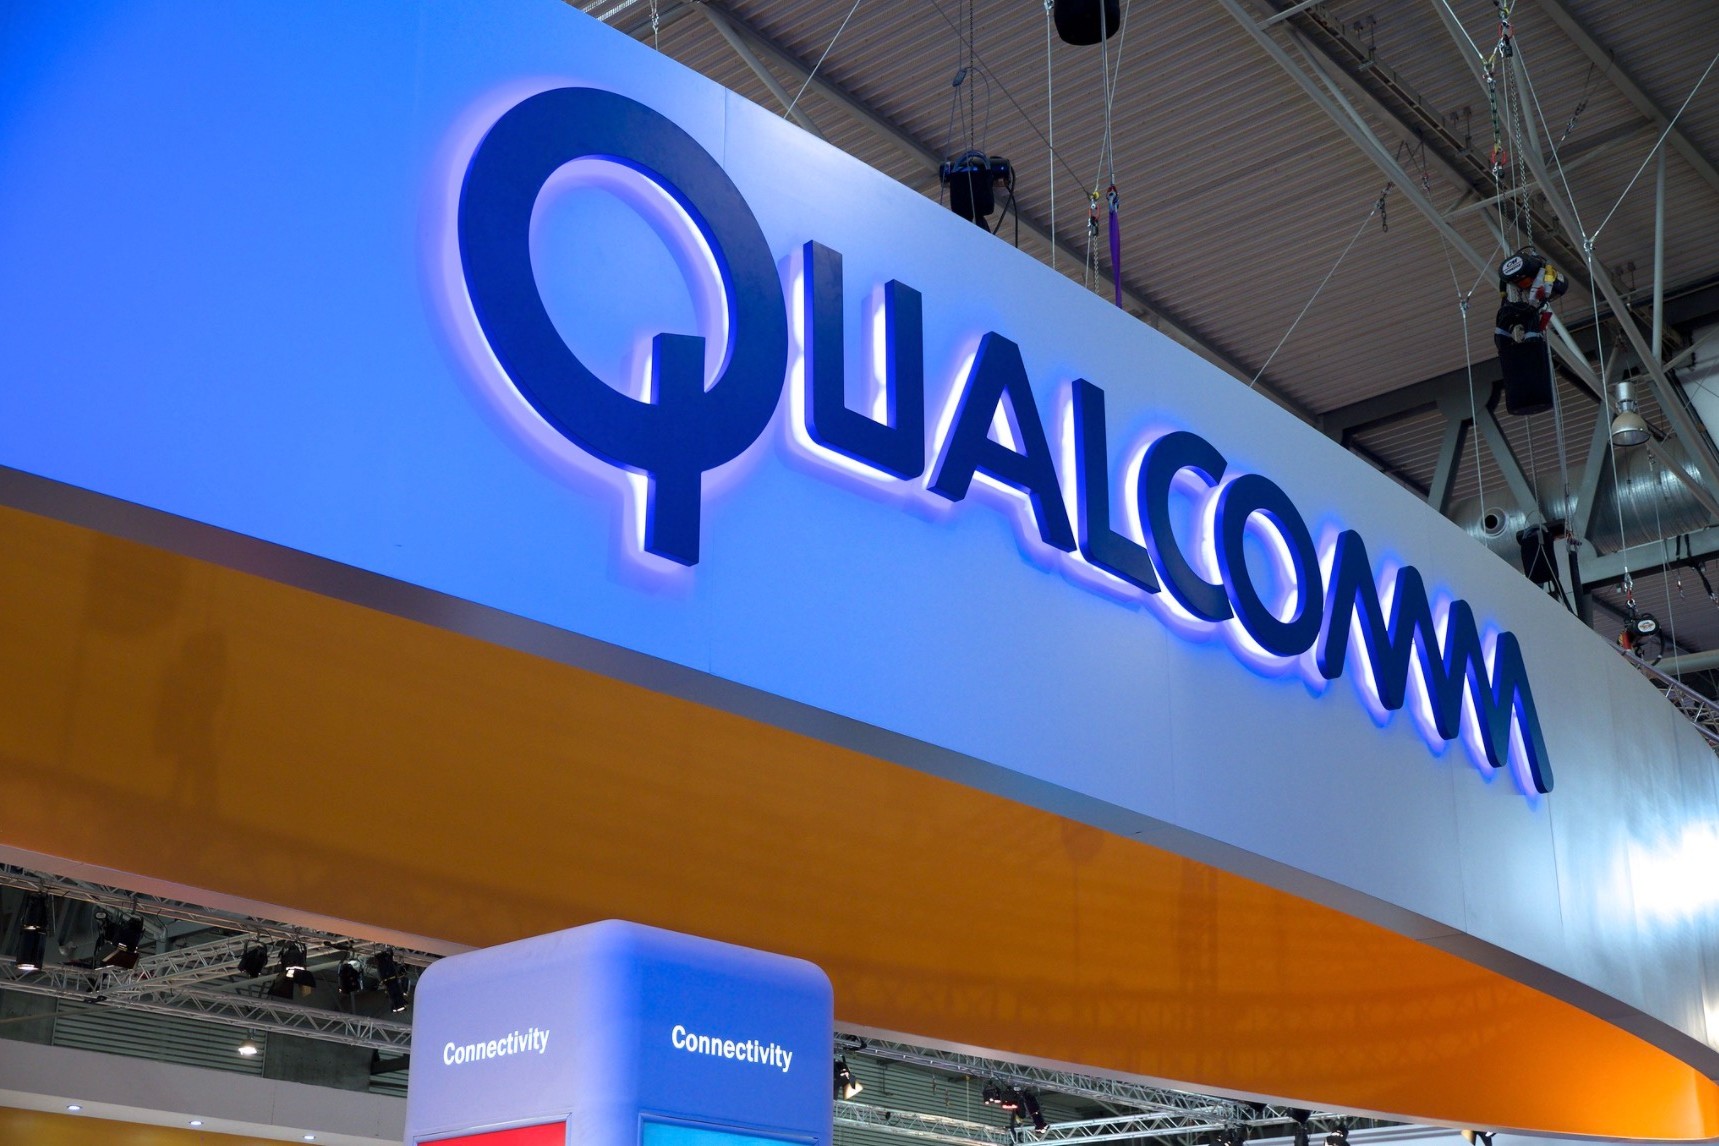 Qualcomm logo at an event.